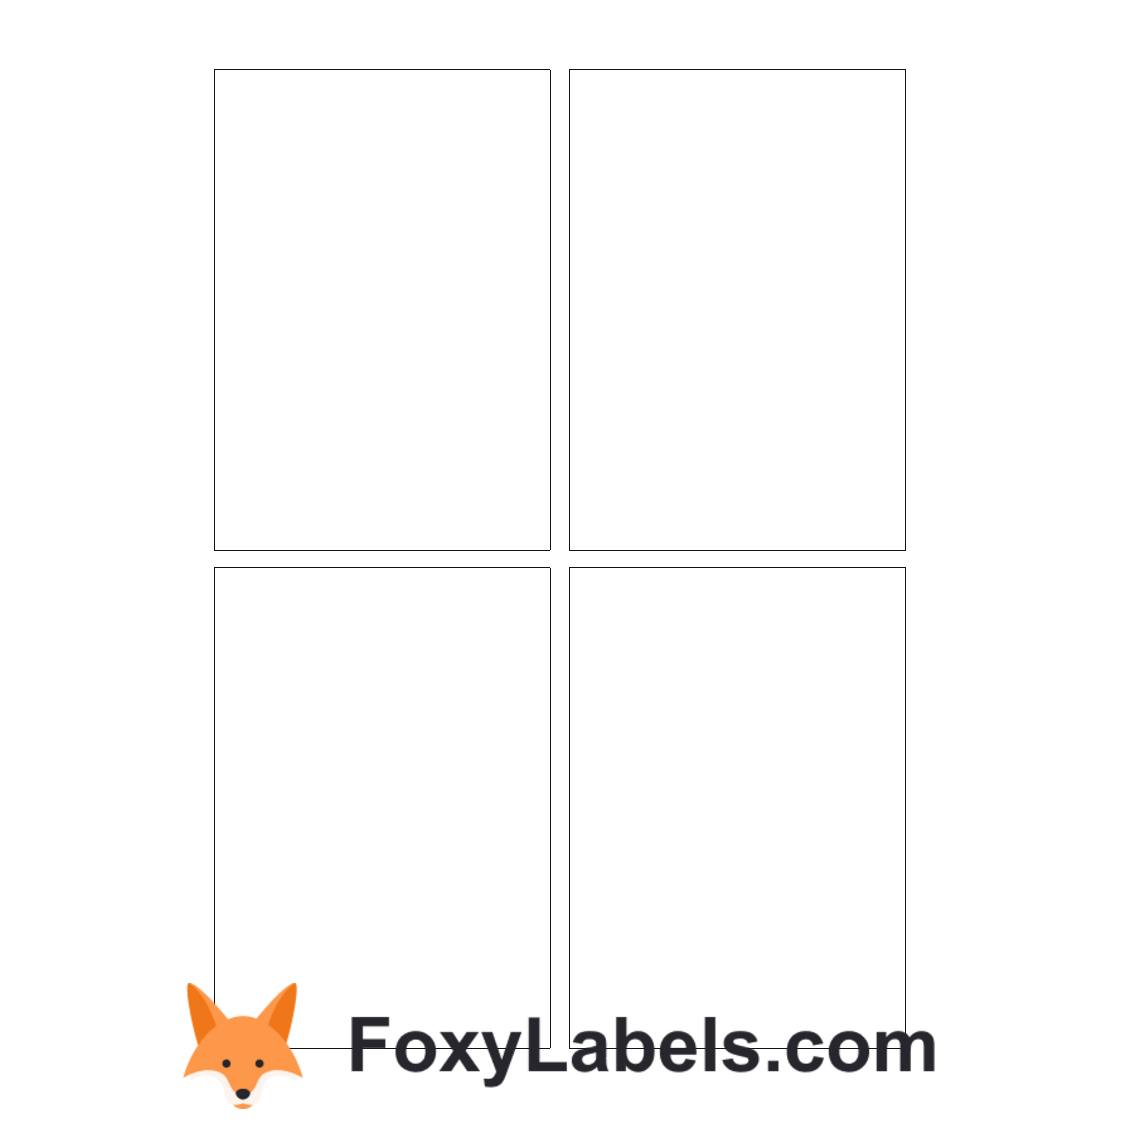 Herma 8898 label template for Google Docs